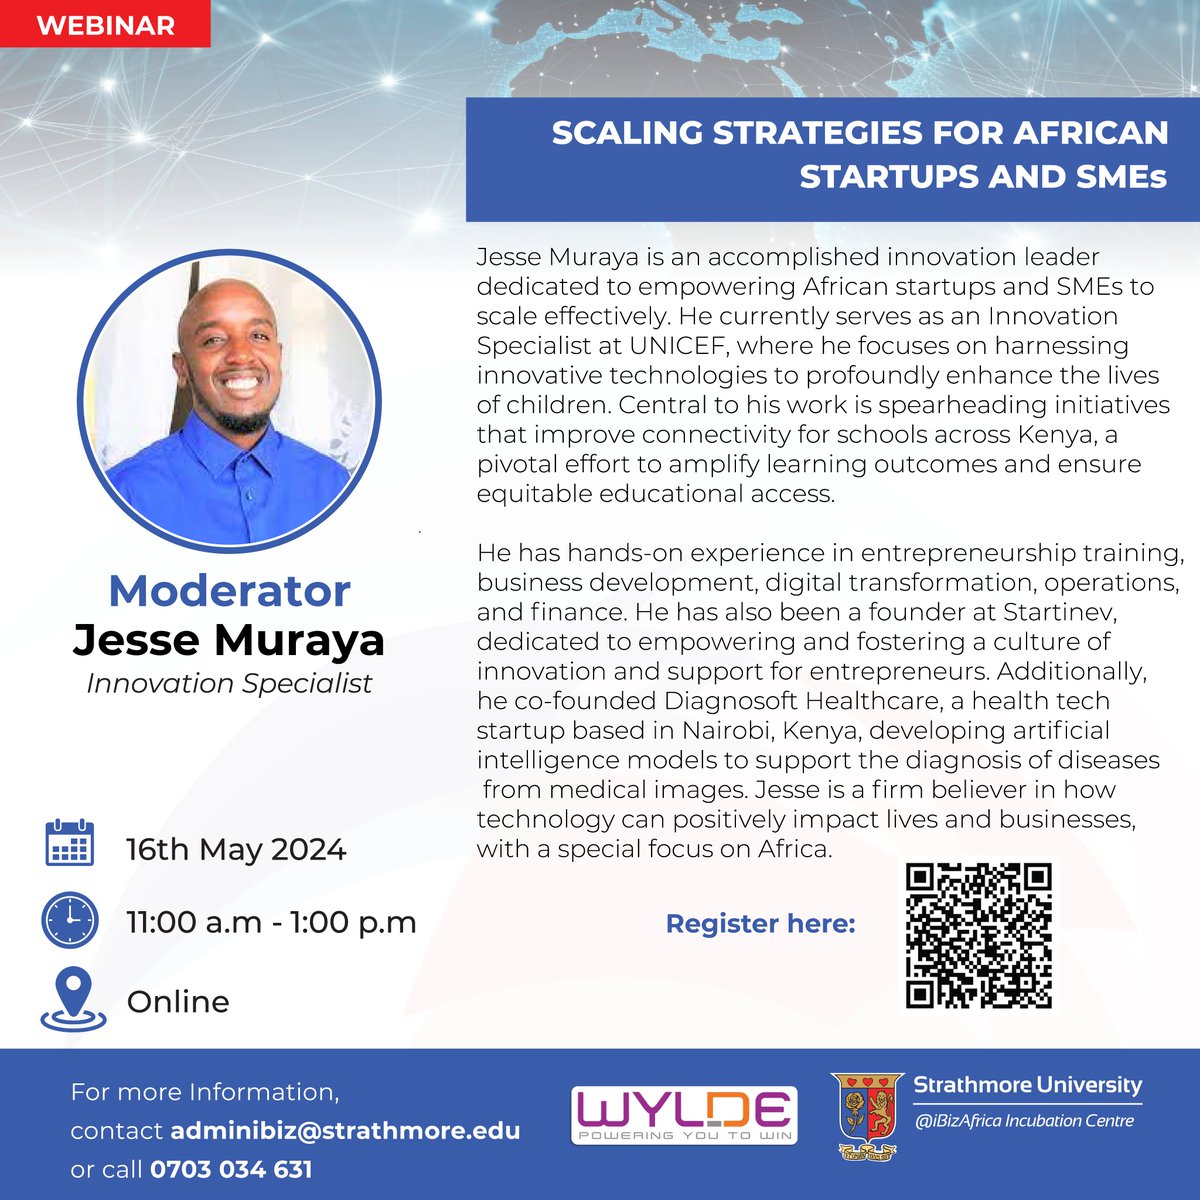 Meet our speaker @itsJesseMuraya! He will be speaking at our webinar on Scaling Strategies for African Startups and SMEs! 🚀🌍 Join us on 🗓️16th May 2024, 11:00 a.m. - 1:00 p.m. to learn how to grow your business in today's economy. 💡 Register now bit.ly/ScalingStrateg…… 🔗